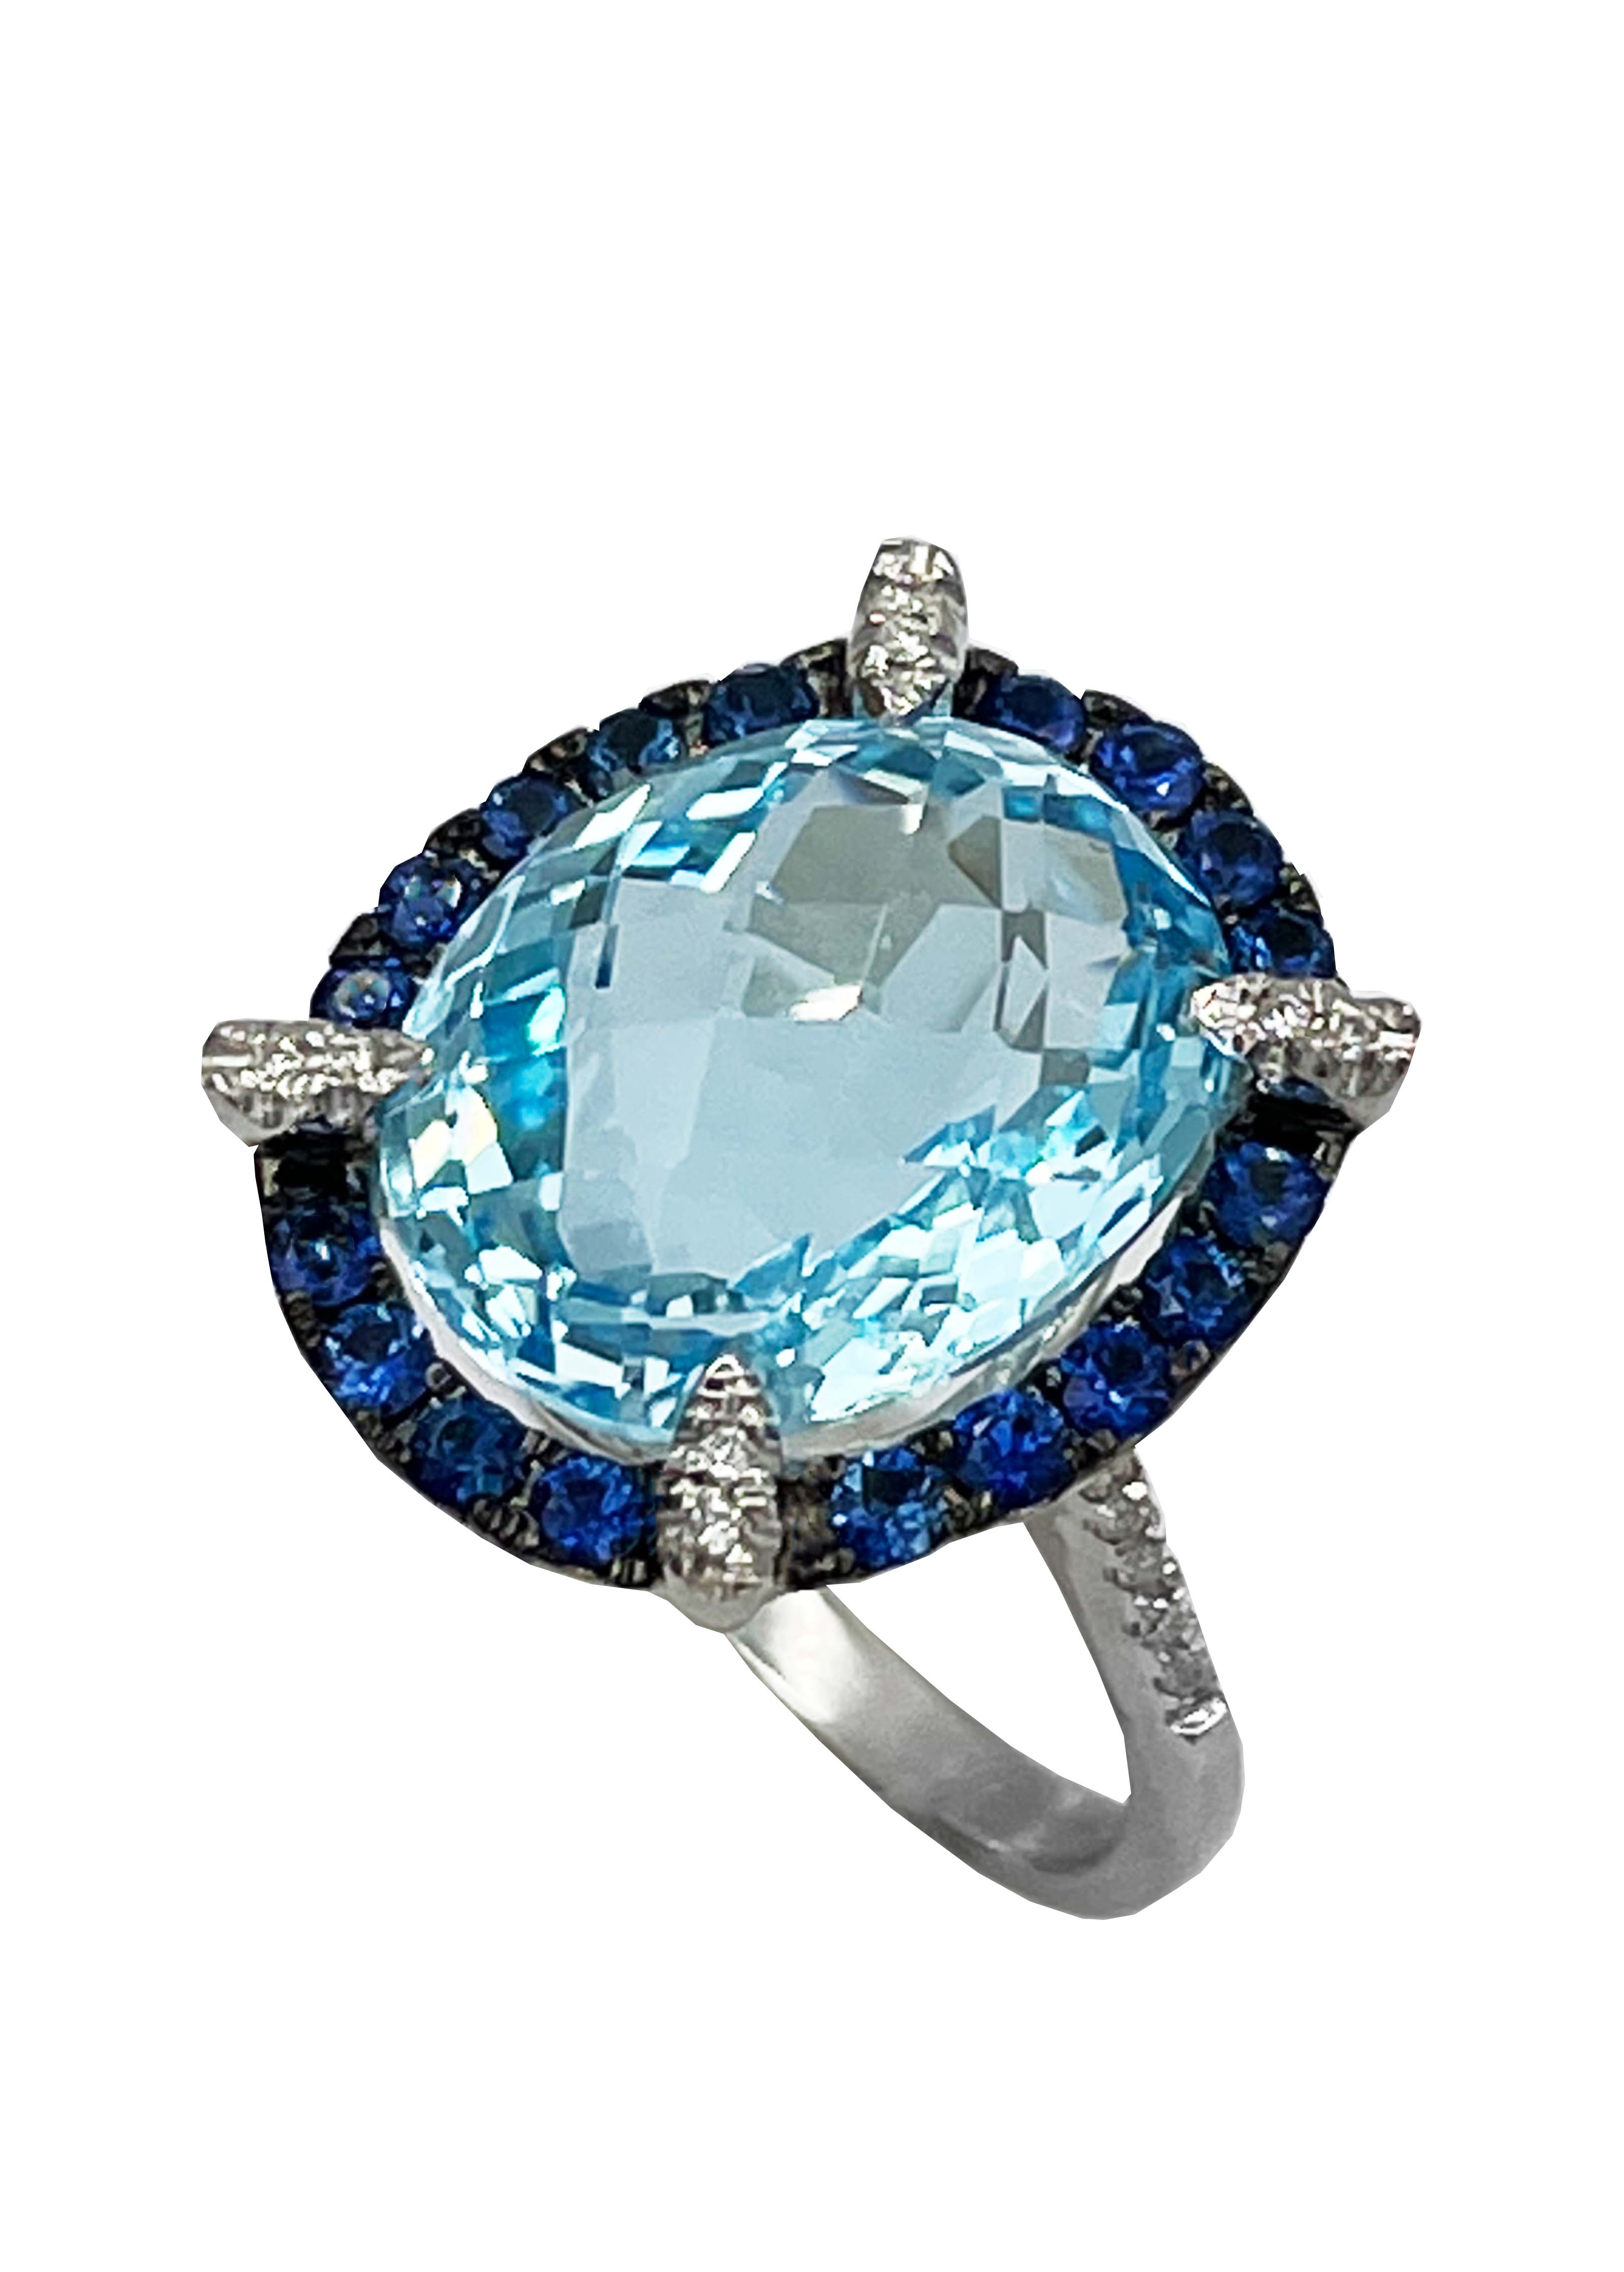 18k White Gold Oval Blue Topaz, Diamond and Sapphire Ring Image